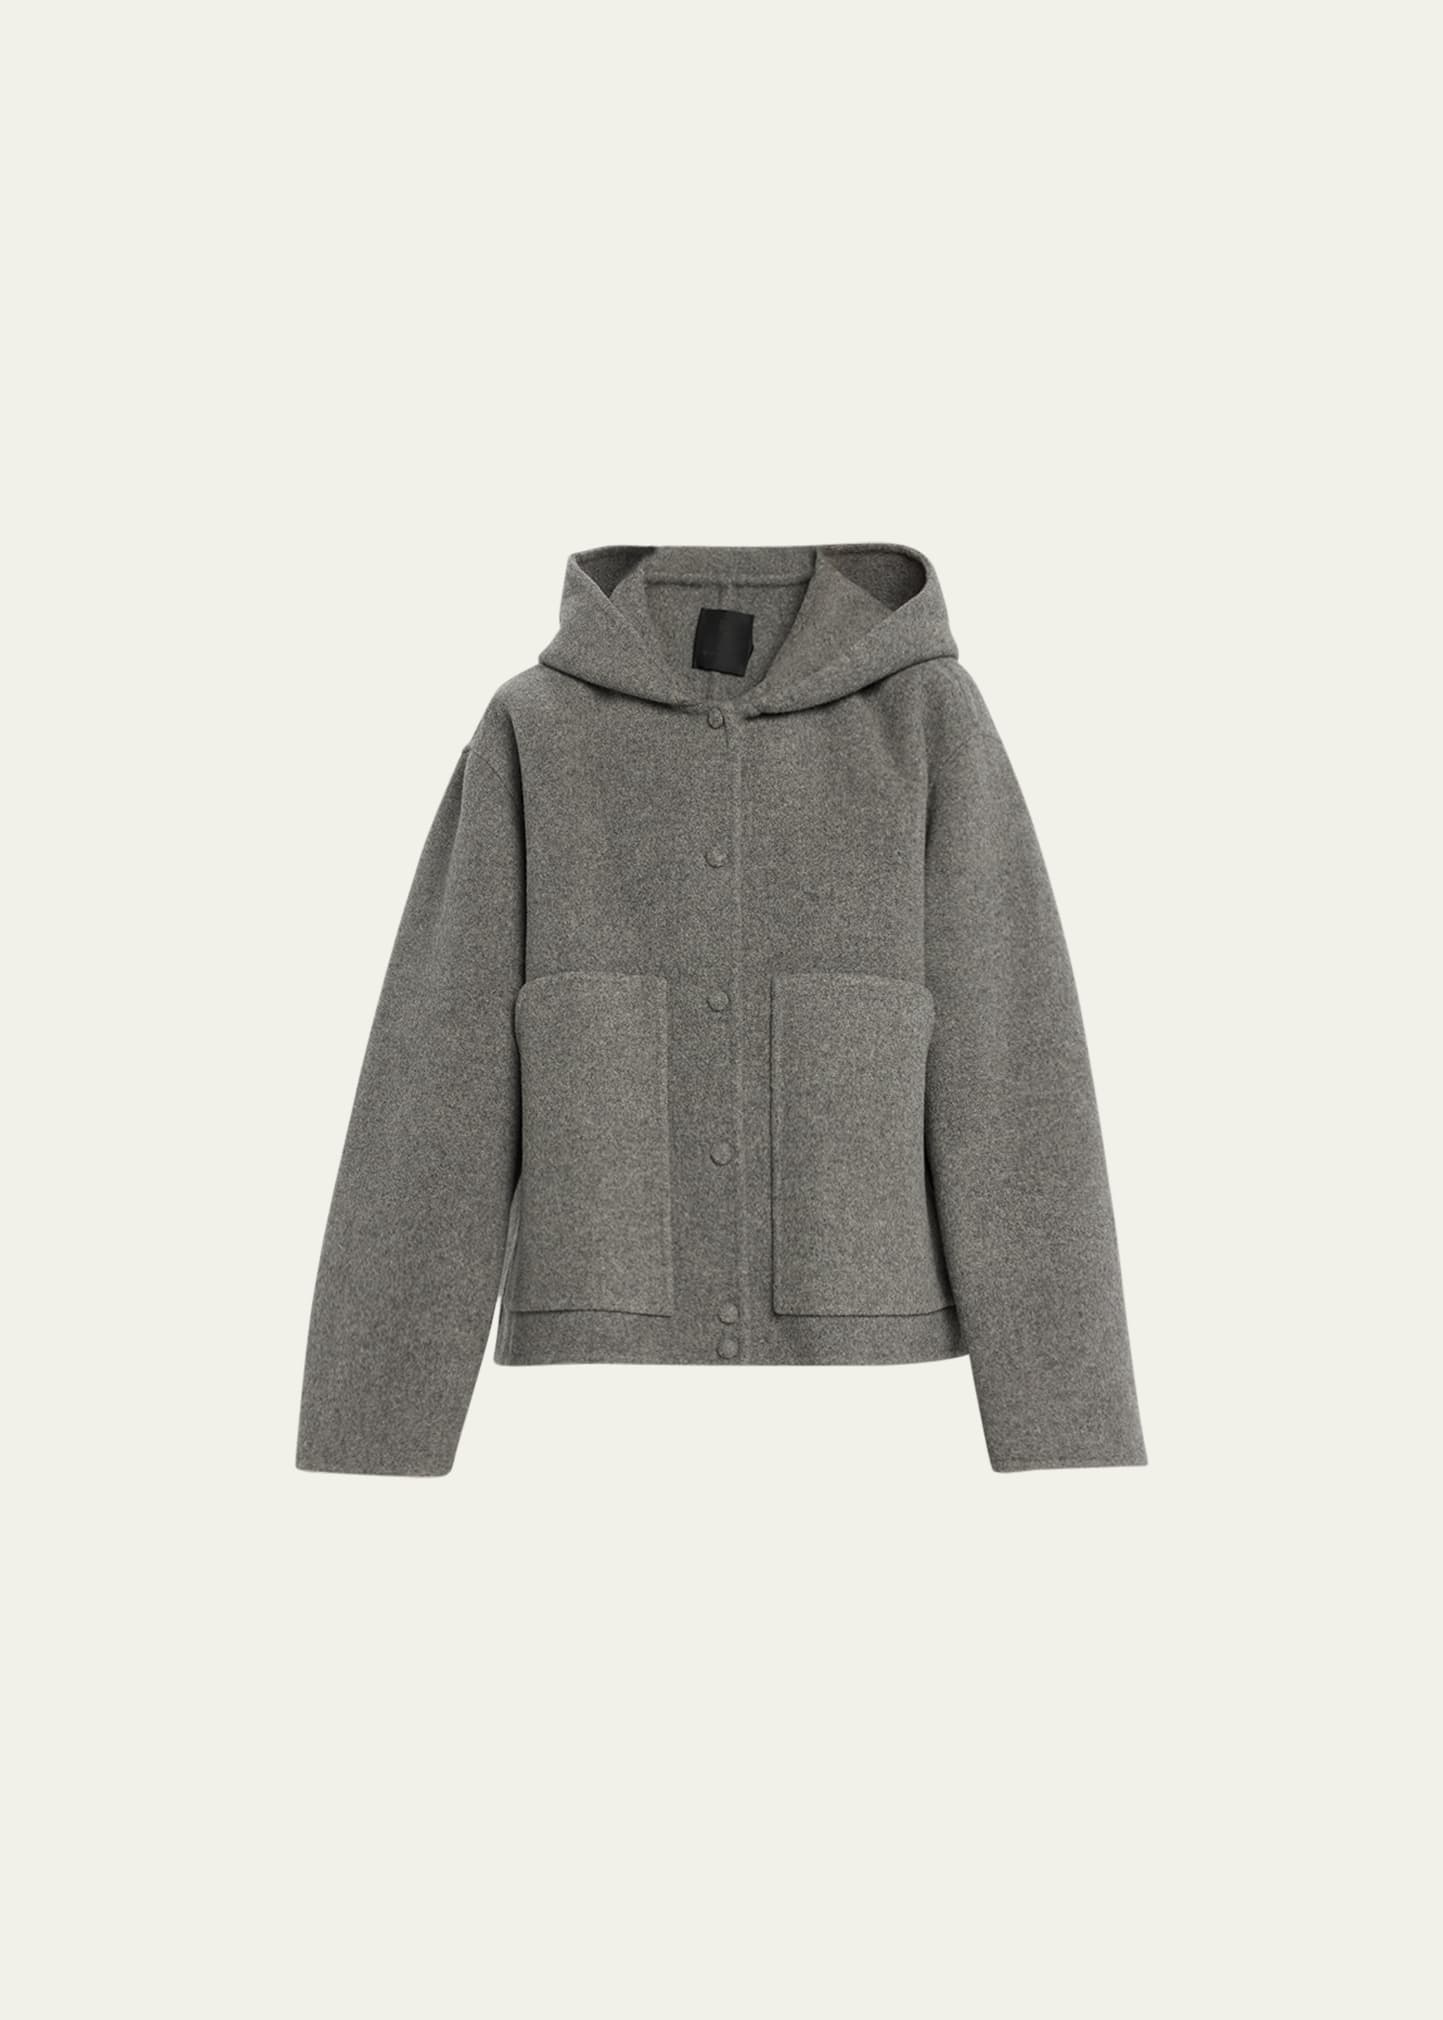 Givenchy Felt Wool Loose Fit Coat With Splitable Hood In Light Grey Melang